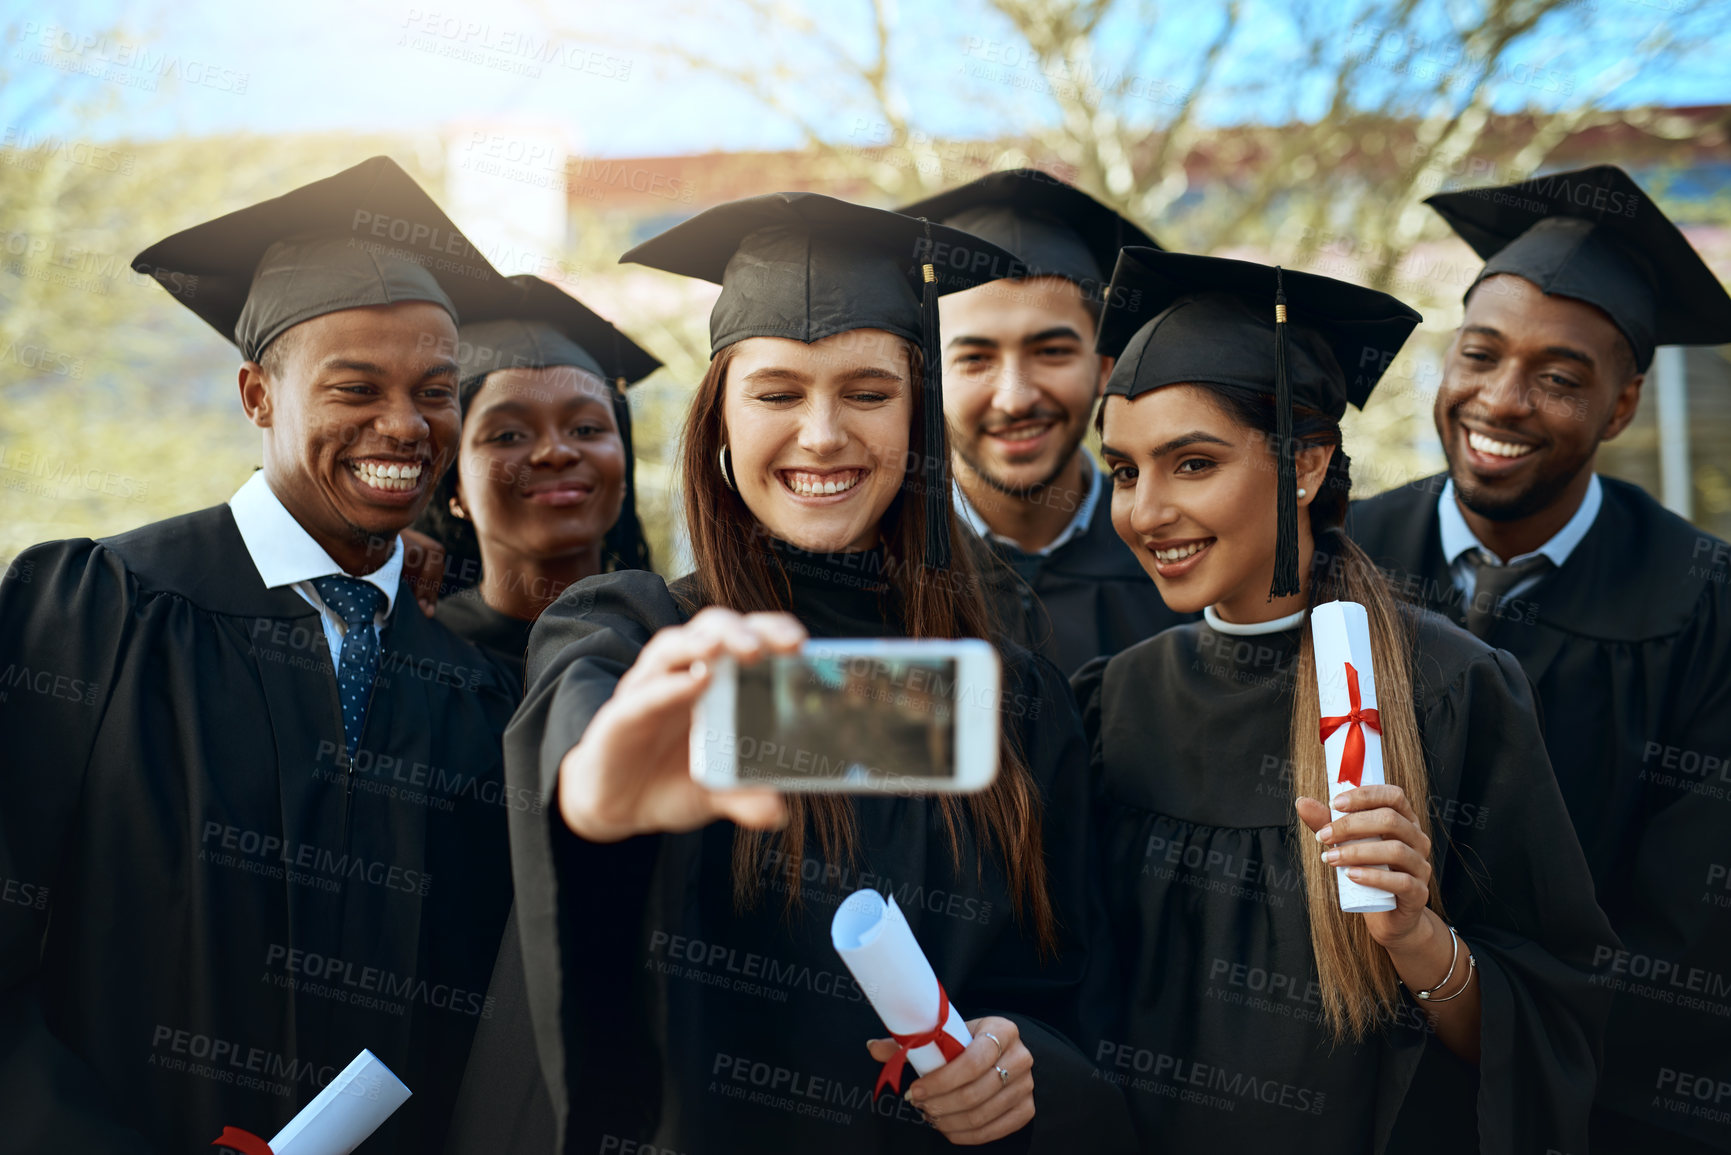 Buy stock photo Shot of a group of students taking selfies with a mobile phone on graduation day